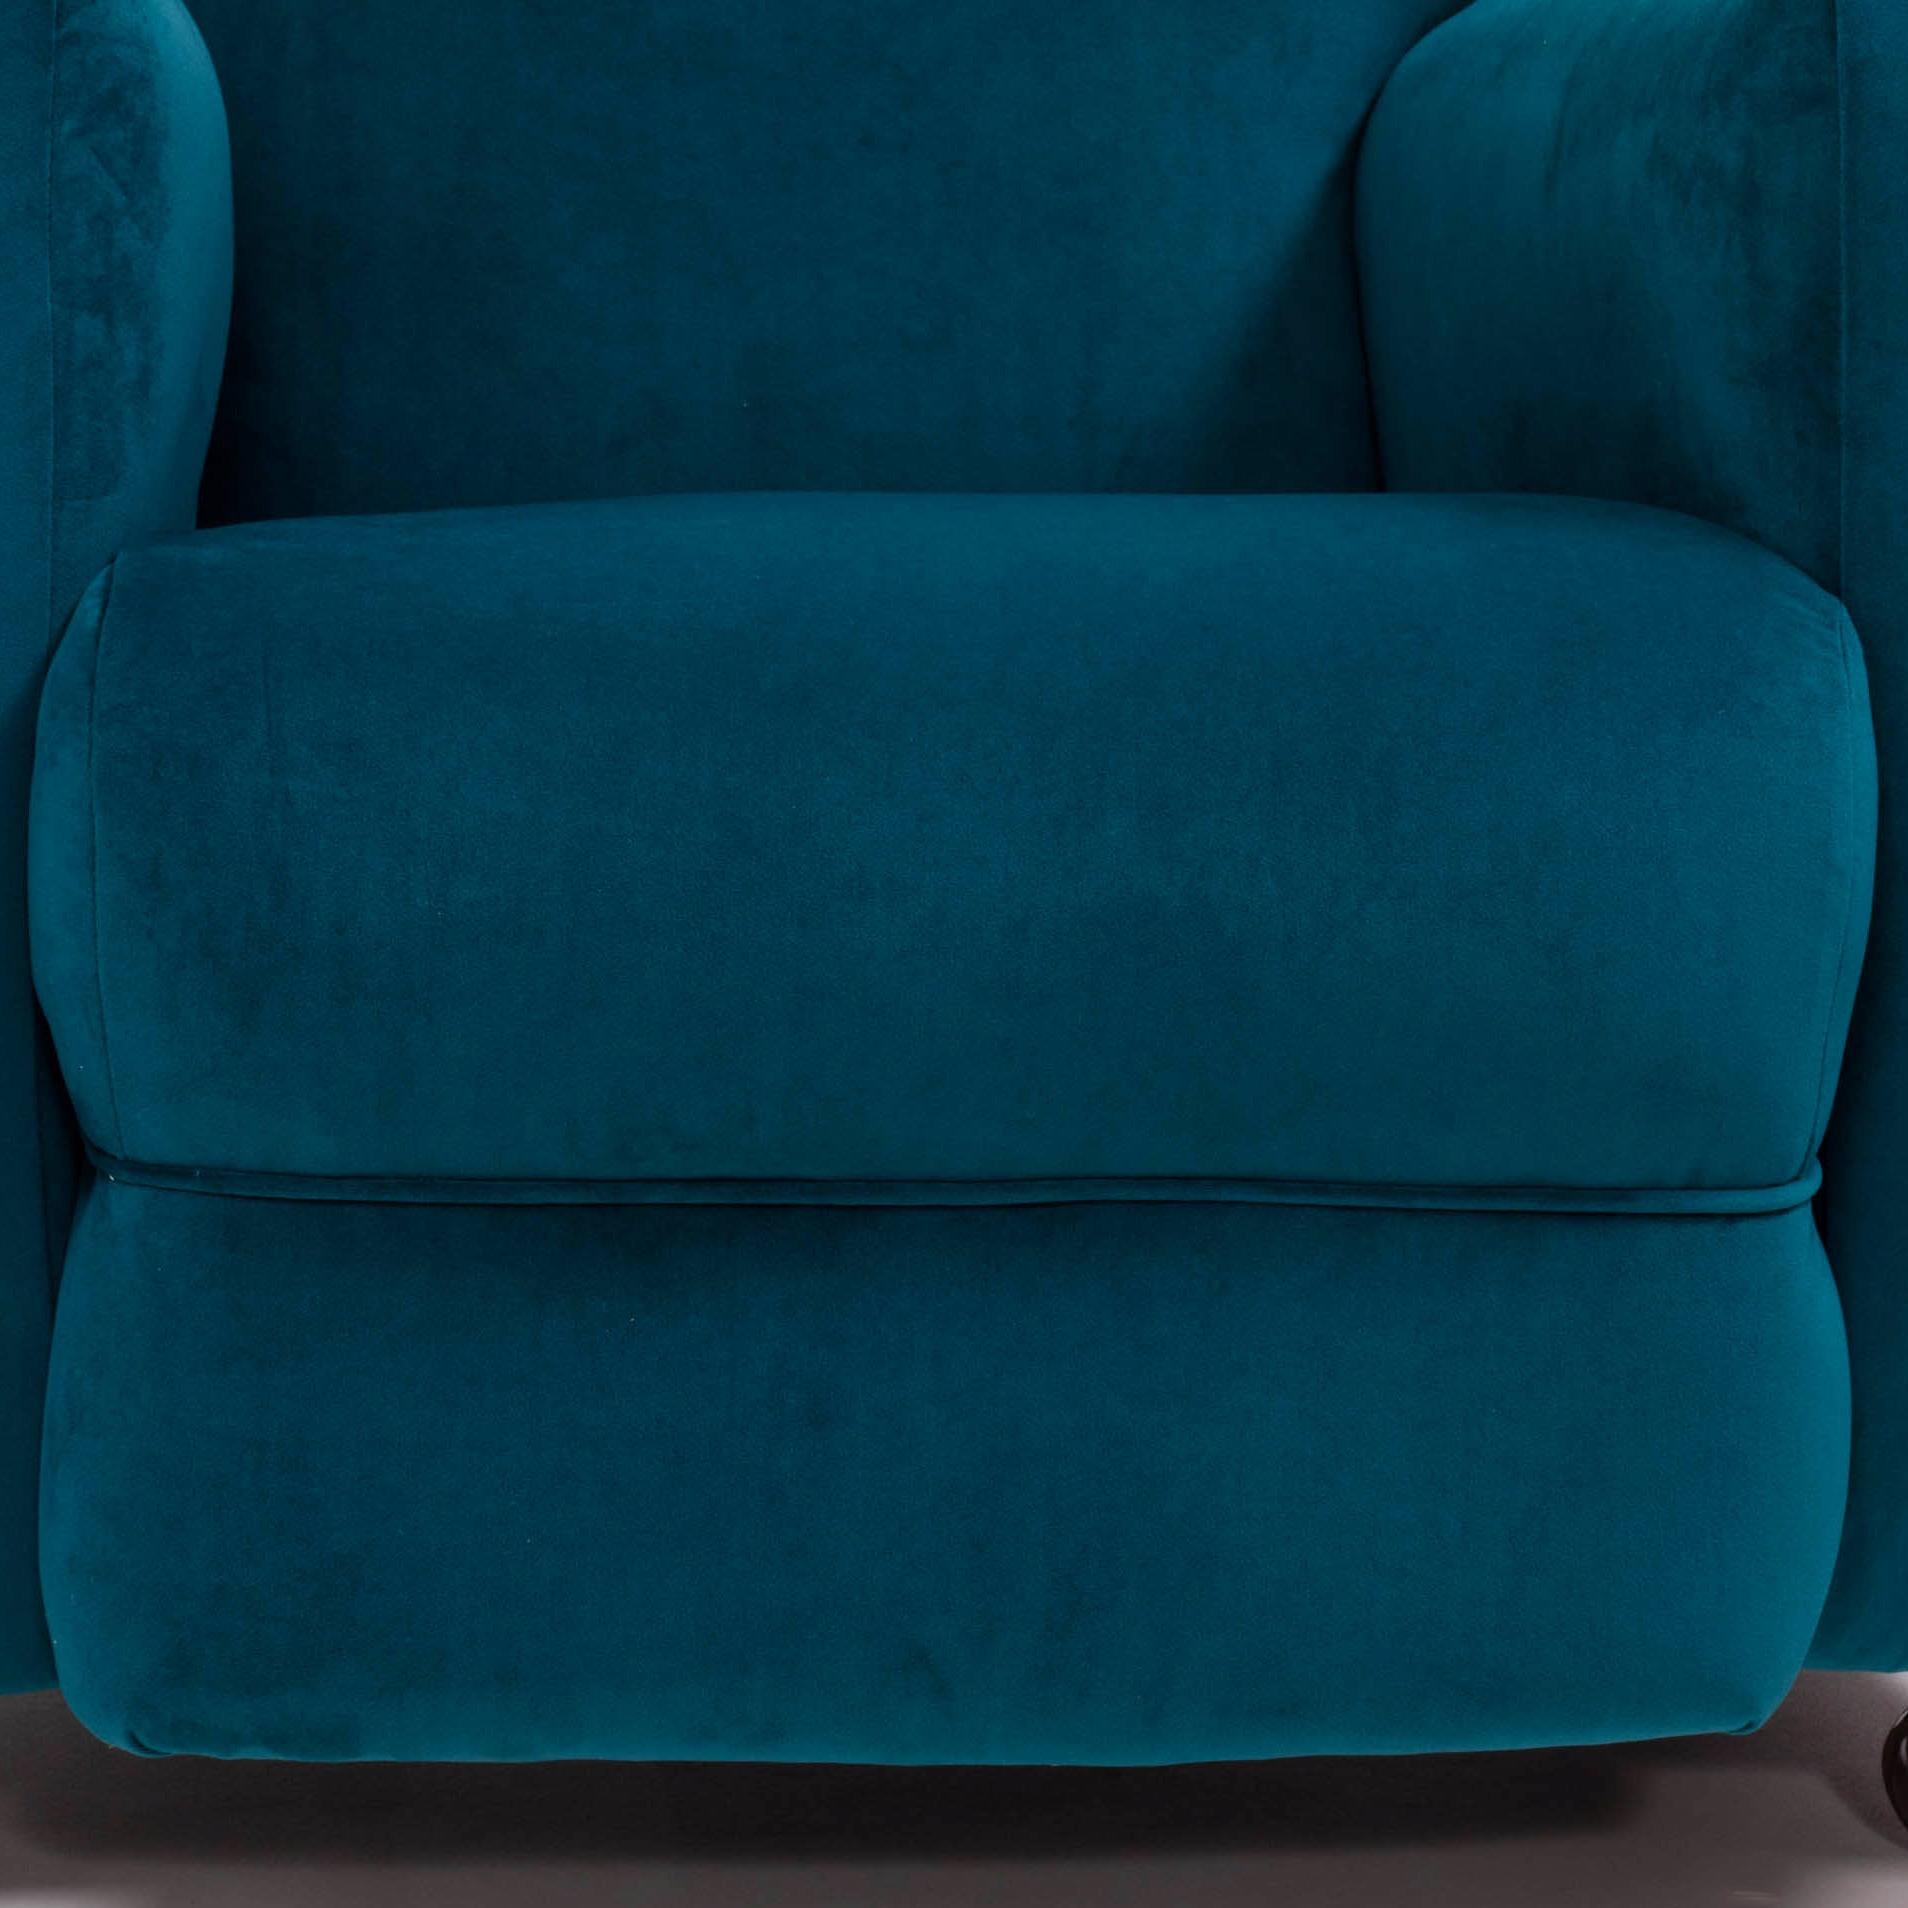 Original 1930s Art Deco Curved Blue Teal Velvet Armchairs, Newly Upholstered 2